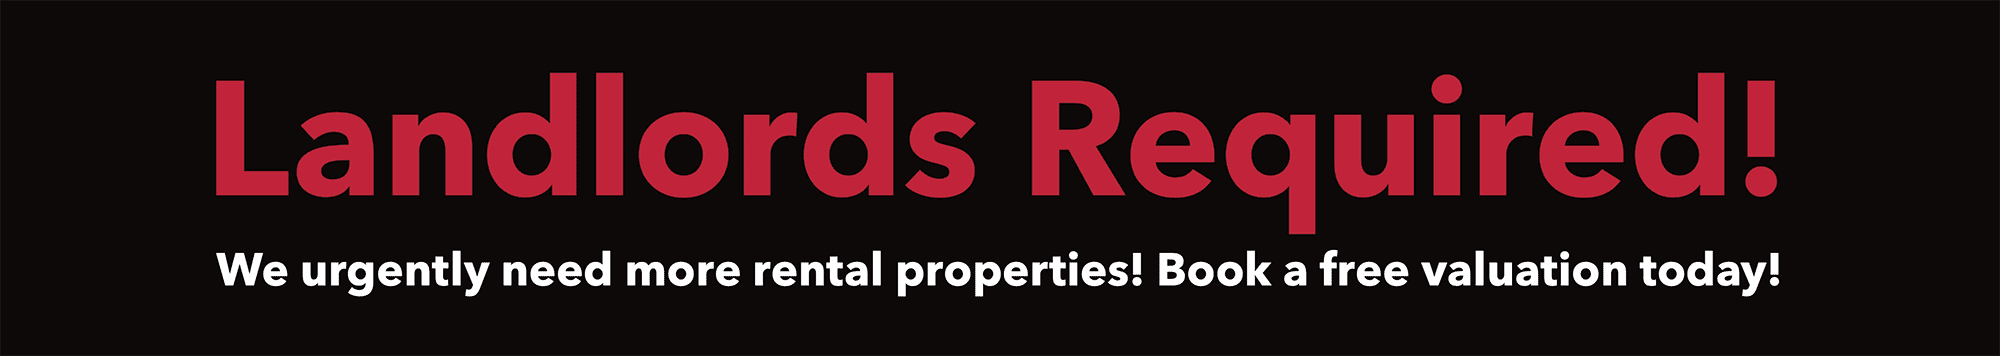 Landlords Urgently Required!